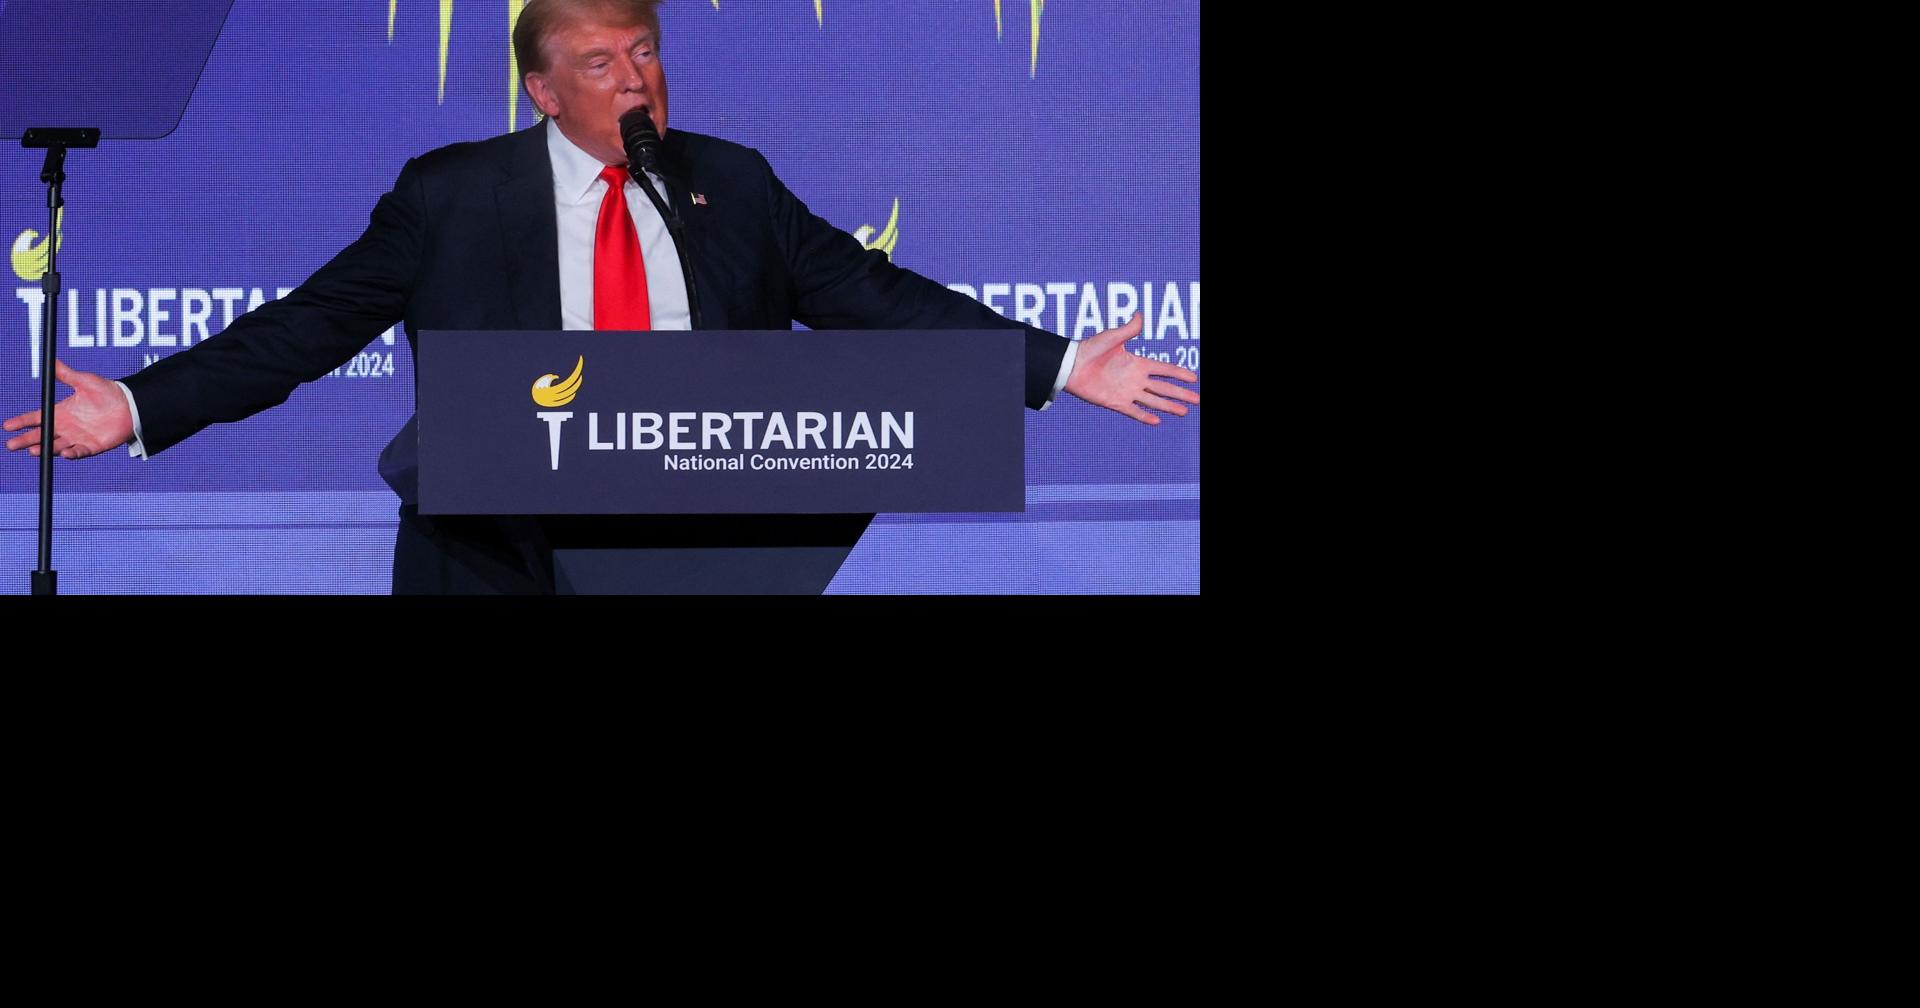 Former US President Trump heckled at Libertarian Party’s national